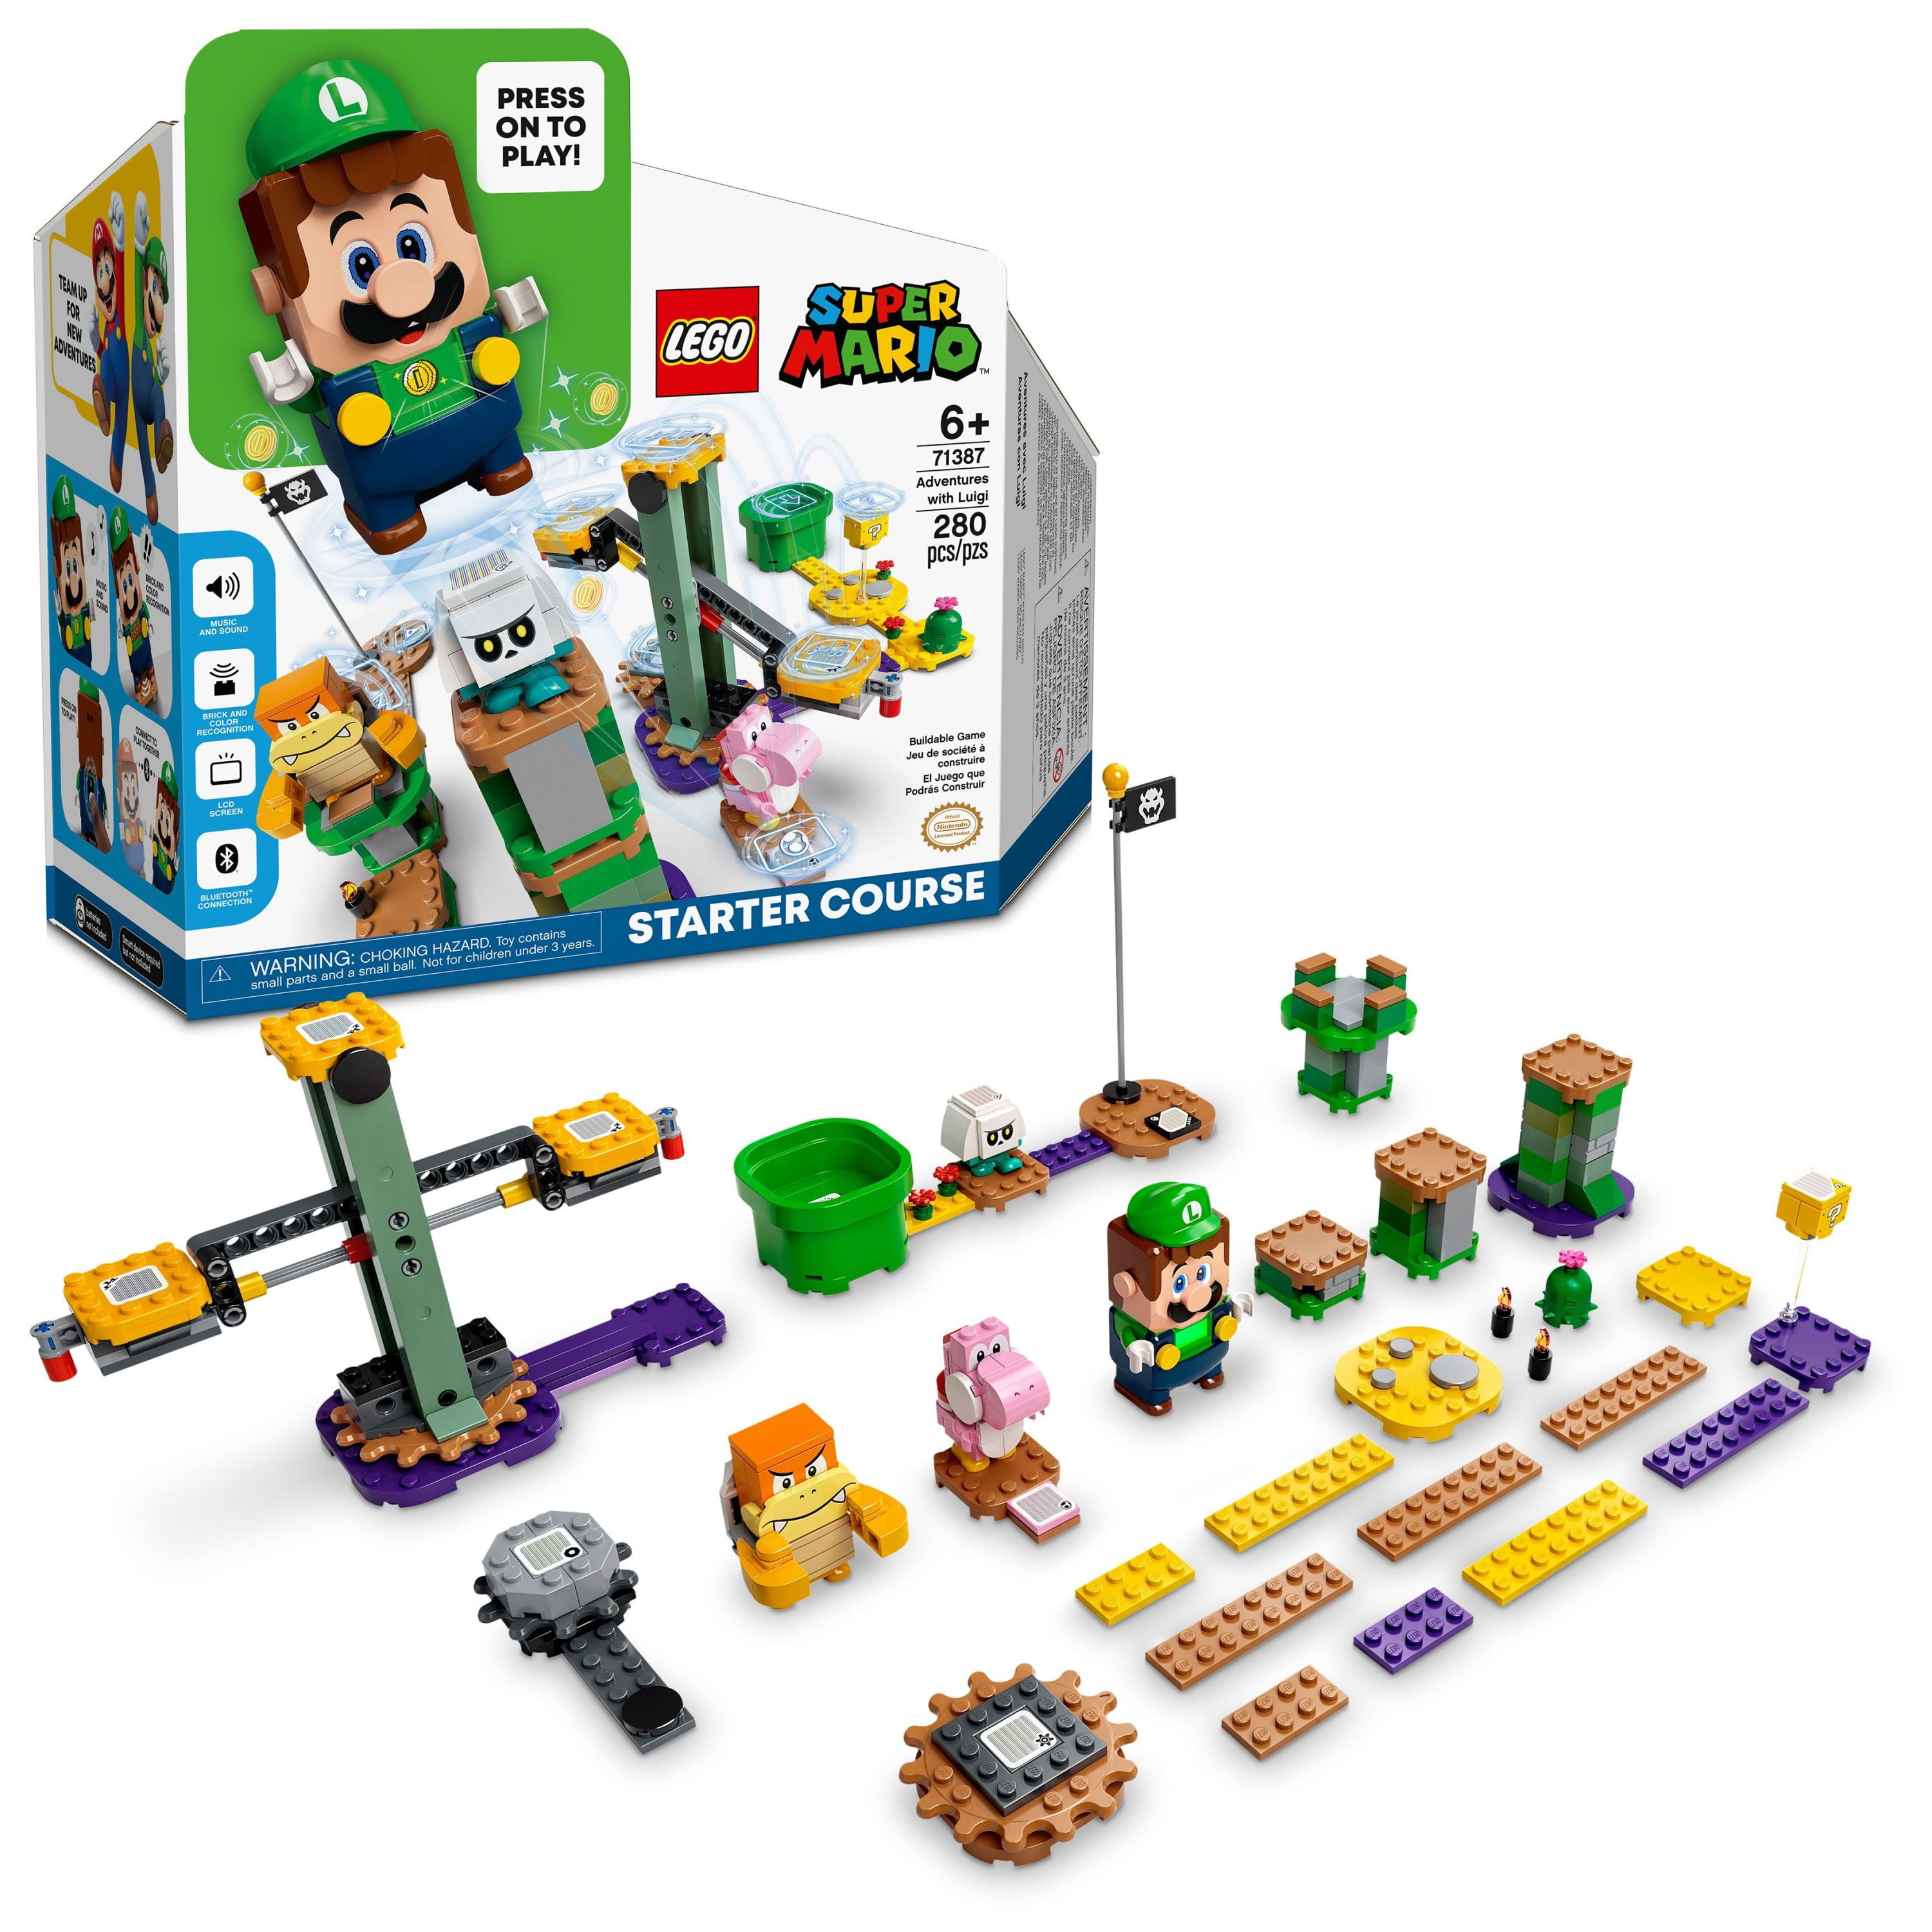 Fordi Teenager tyveri LEGO Super Mario Adventures with Luigi Starter Course 71387 Toy for Kids,  Interactive Figure and Buildable Game with Pink Yoshi, Birthday Gift for  Super Mario Bros. Fans, Girls & Boys Gifts Age